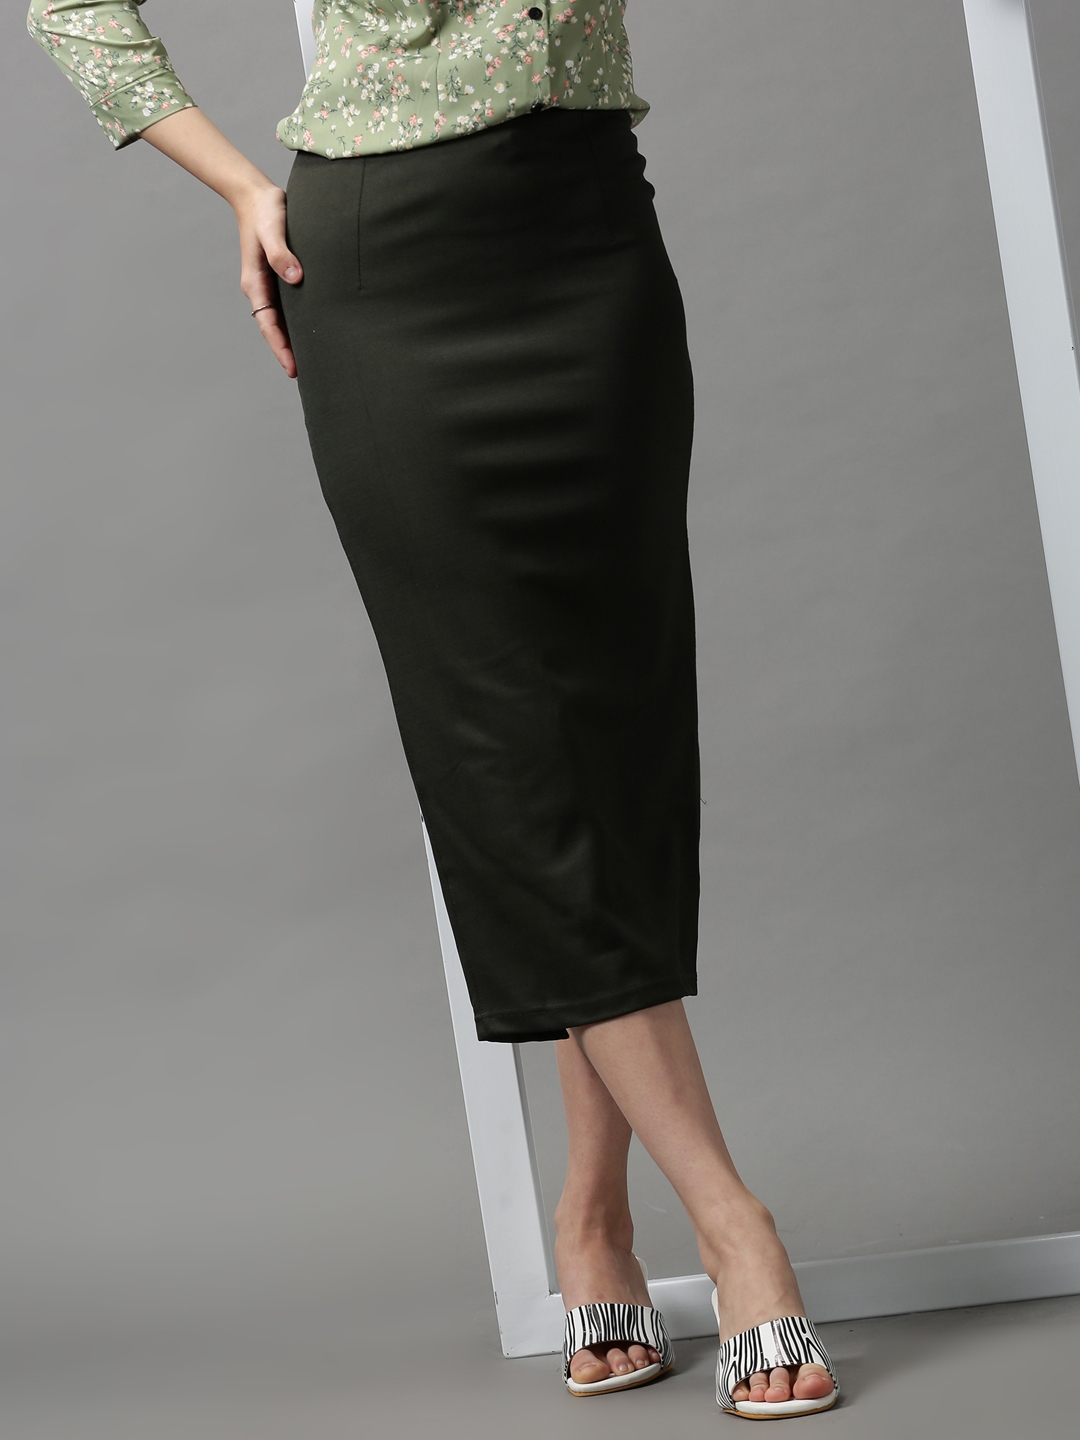 Showoff | SHOWOFF Women's Straight Solid Pencil Olive Knee Length Skirt